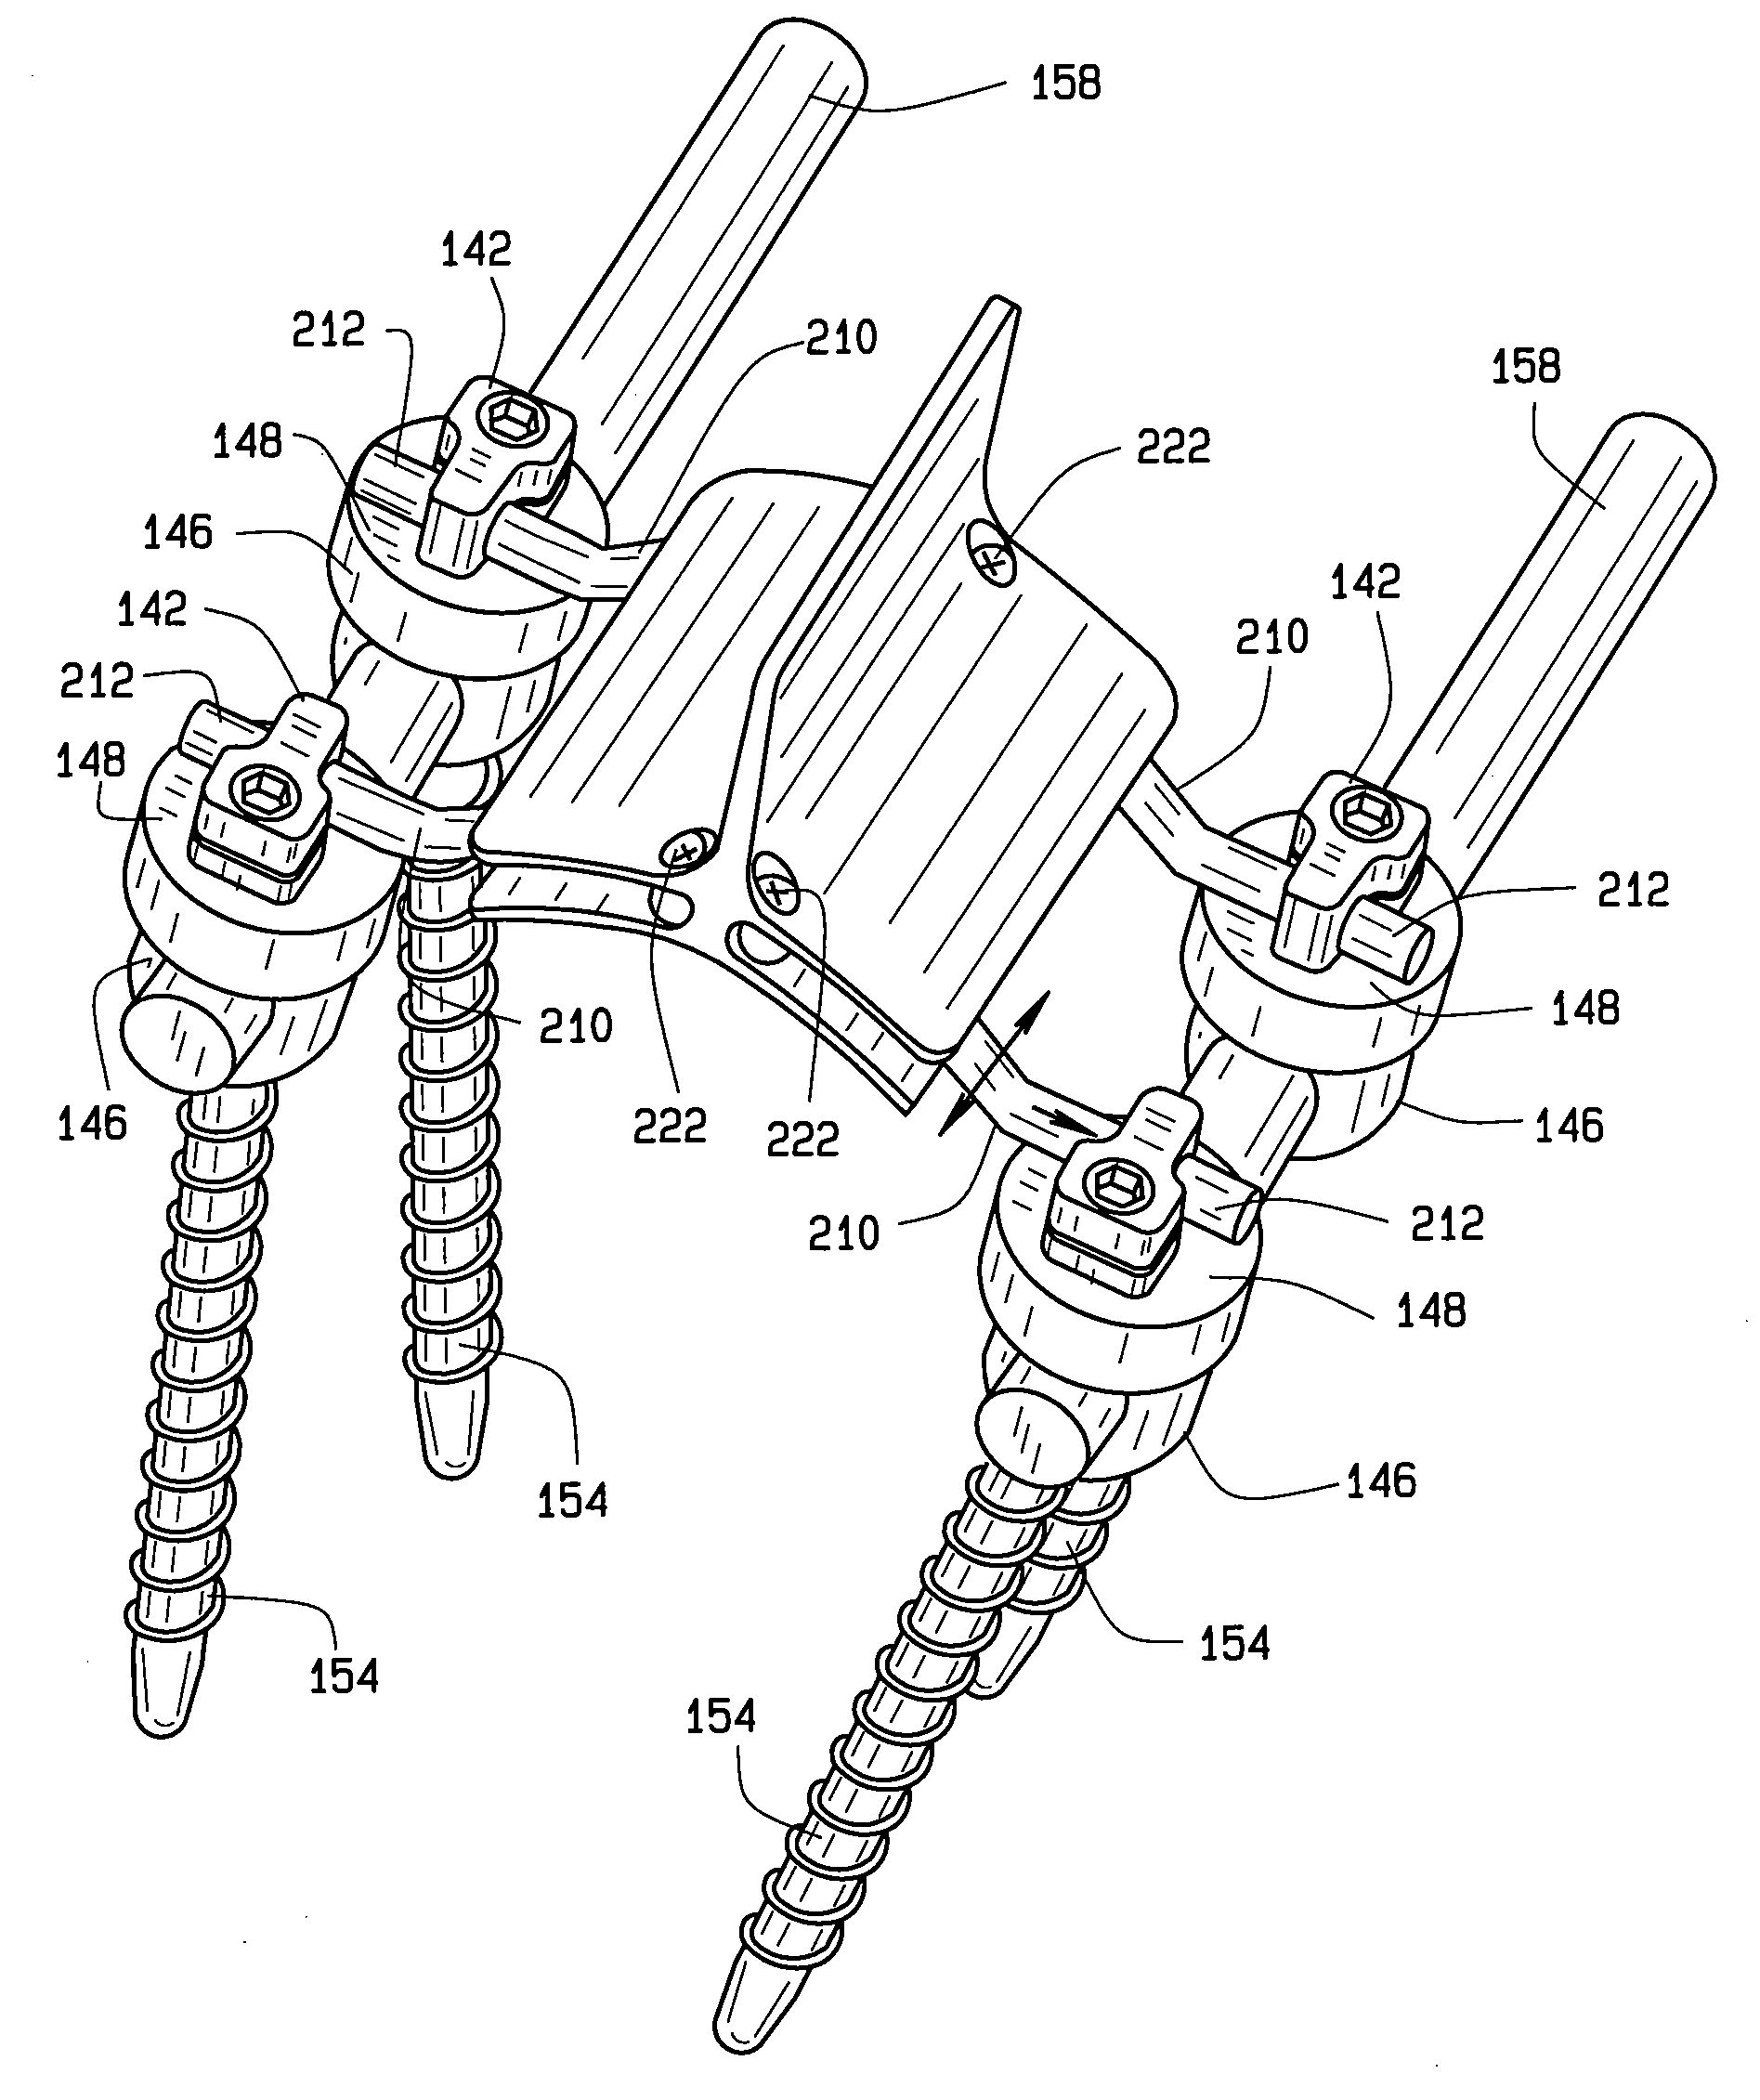 Device for spinal fusion